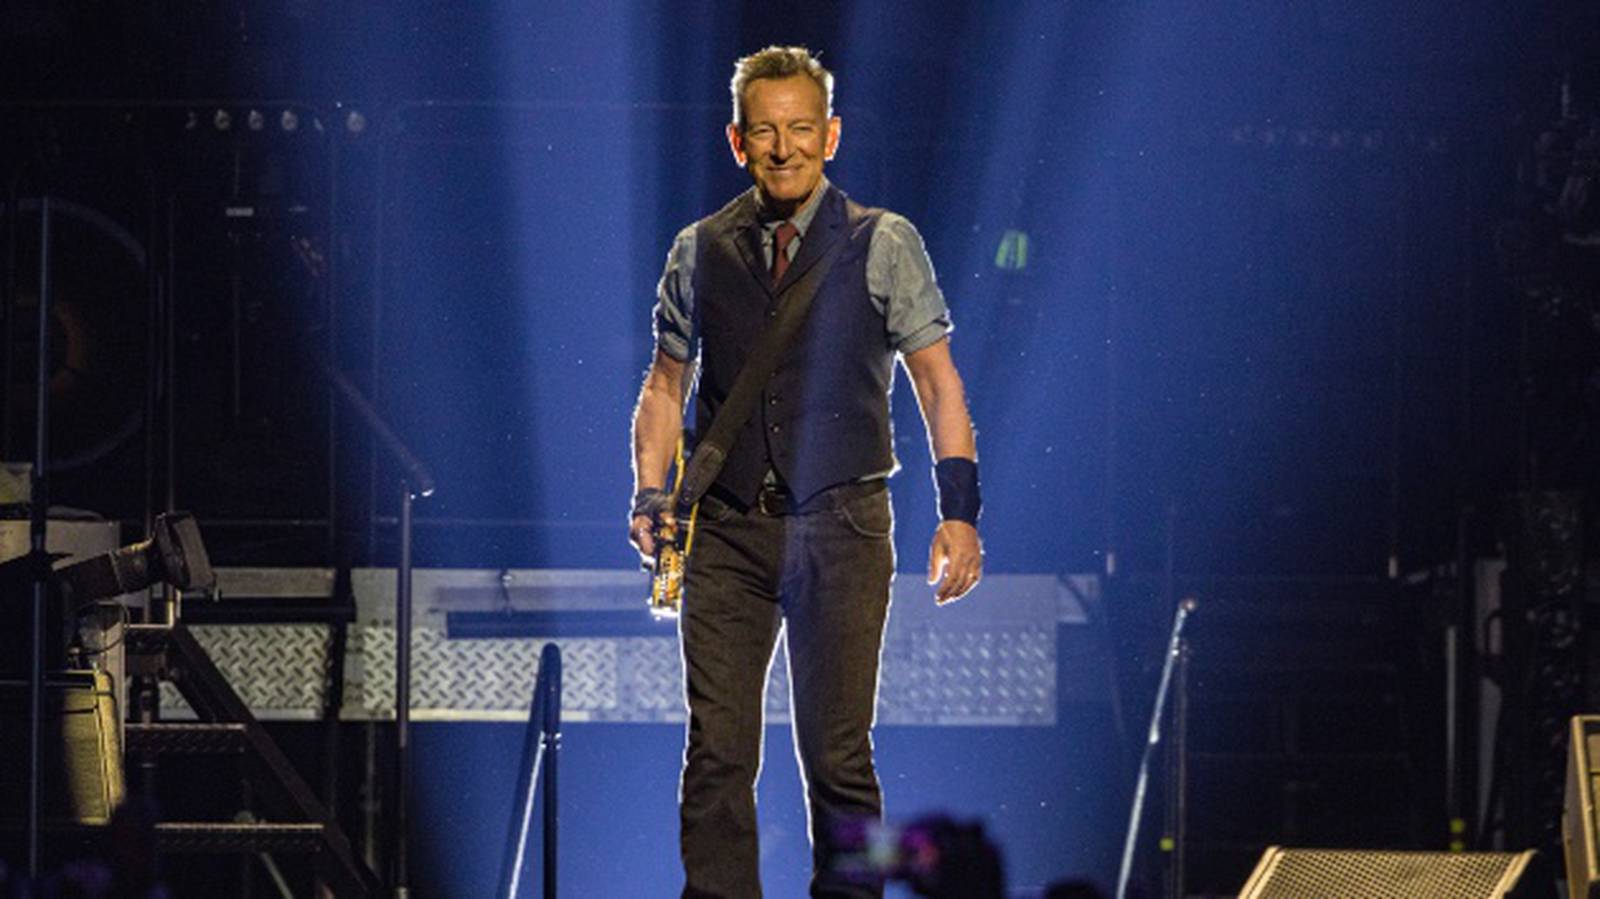 Bruce Springsteen’s treats LA crowd to surprises and the return of